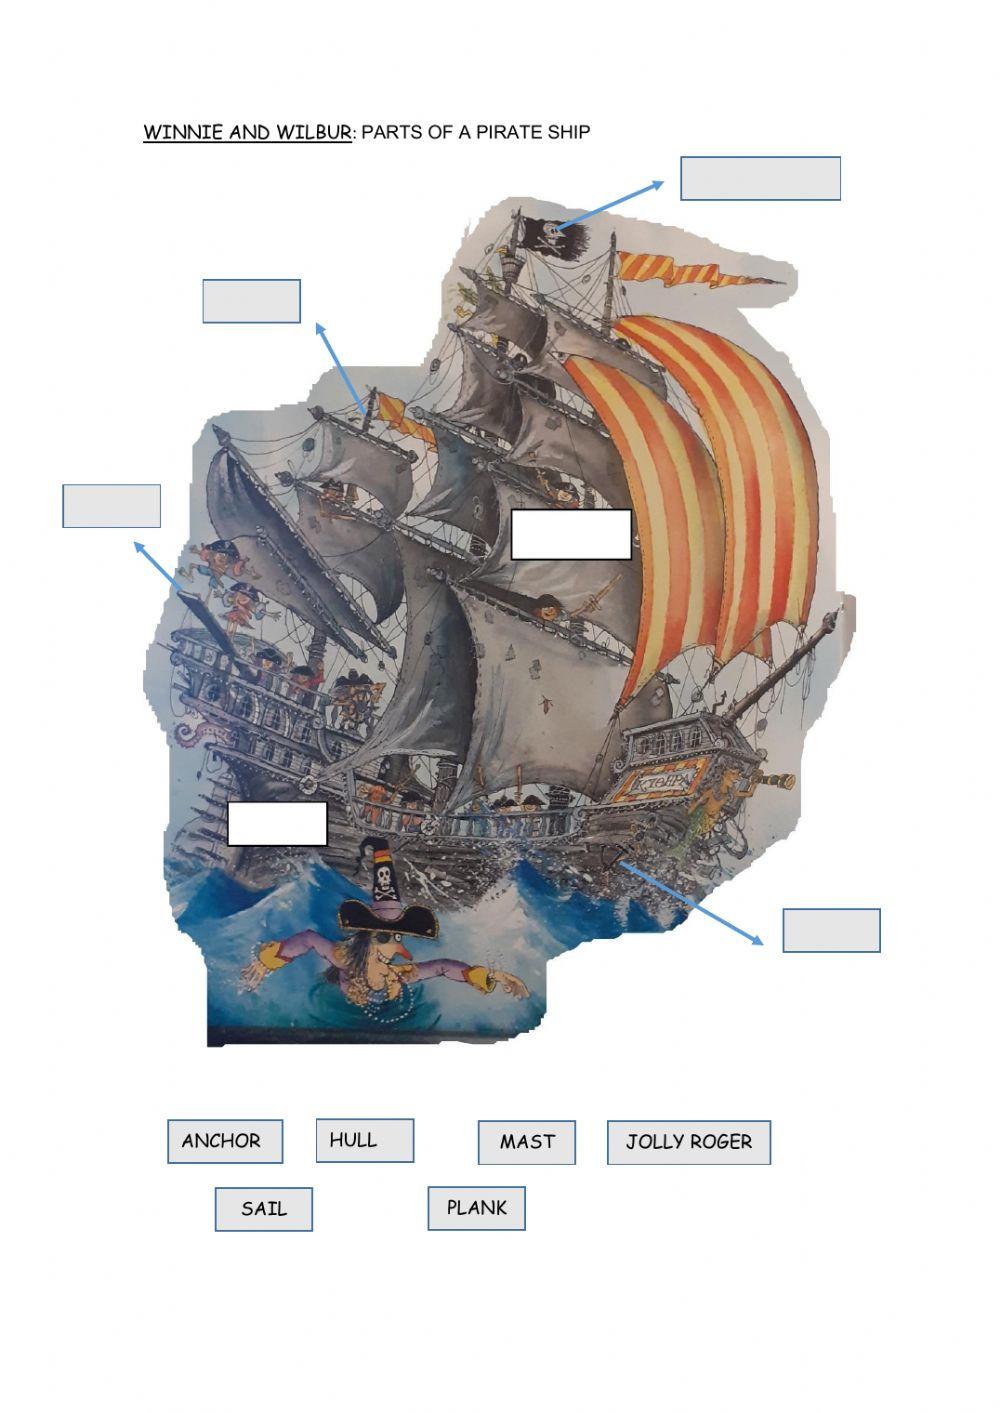 Parts of a Pirate Ship